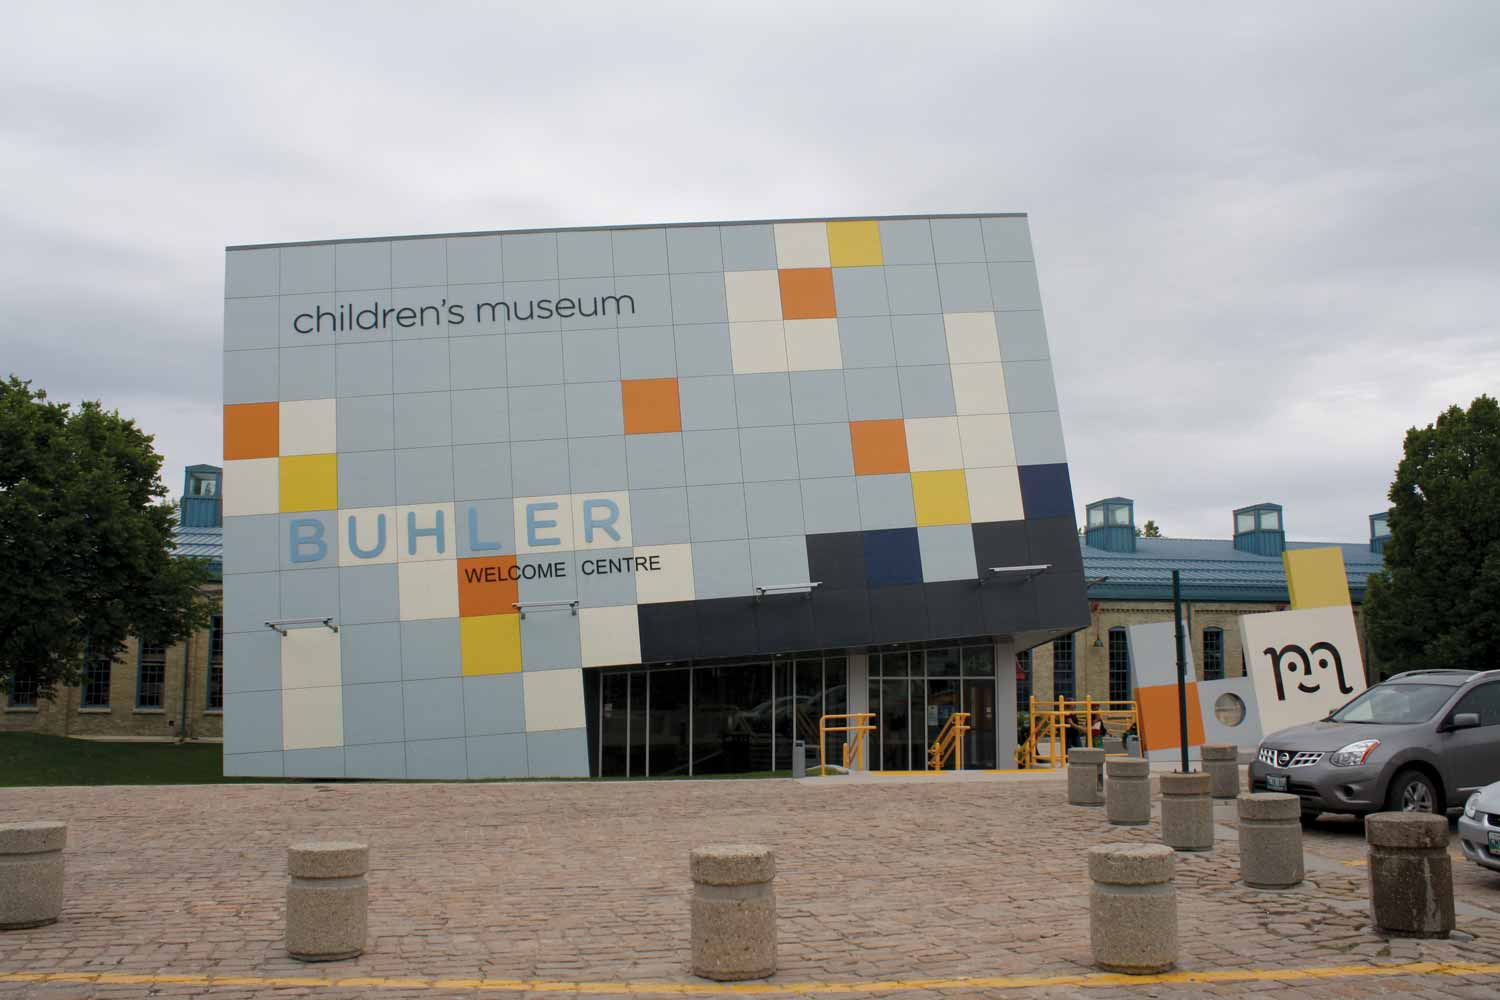 The Welcome Centre addition to the Children's Museum. More modern in style, it is blue, slightly askew, and has a grid of white, yellow, and orange squares as decoration.